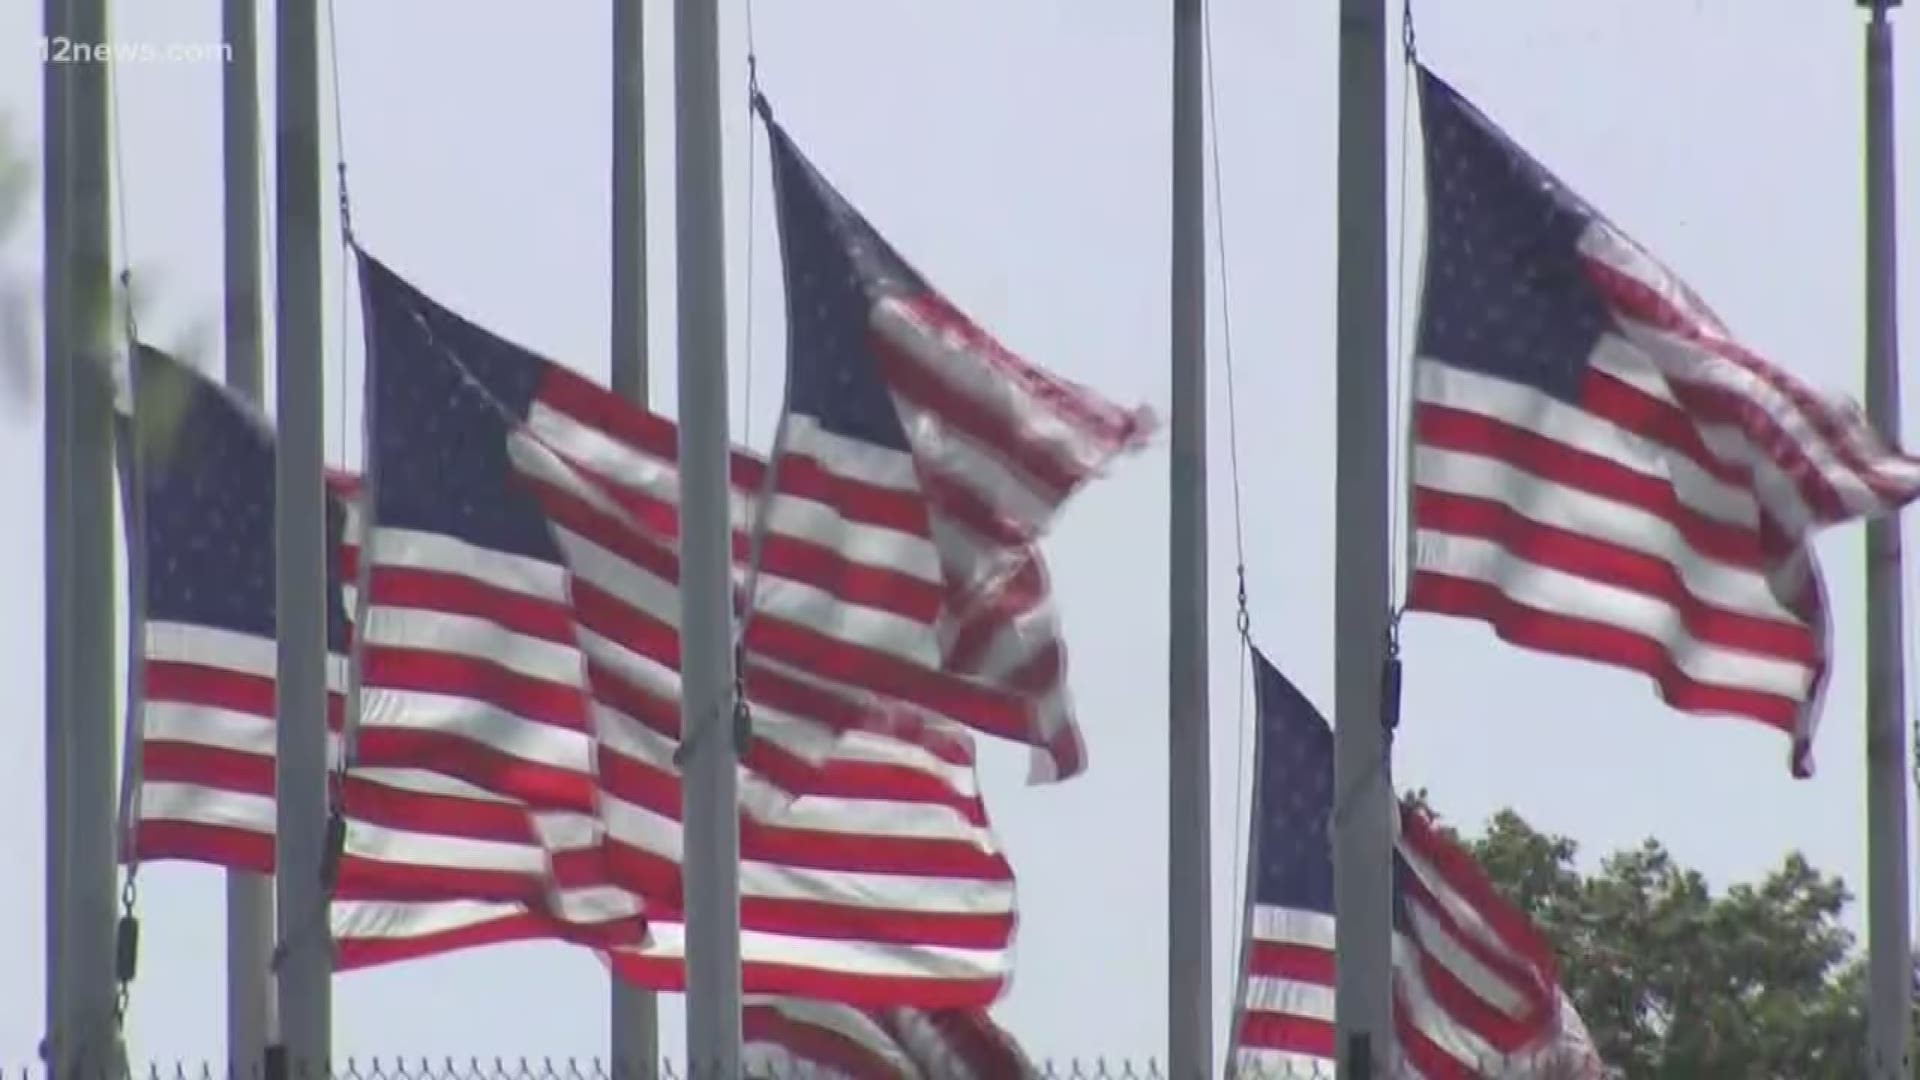 Dishonor or protocol? President Trump has received a lot of criticism for raising flags to full-staff at the White House today while other flags around the country remained at half-staff. Is the criticism warranted? We verify!